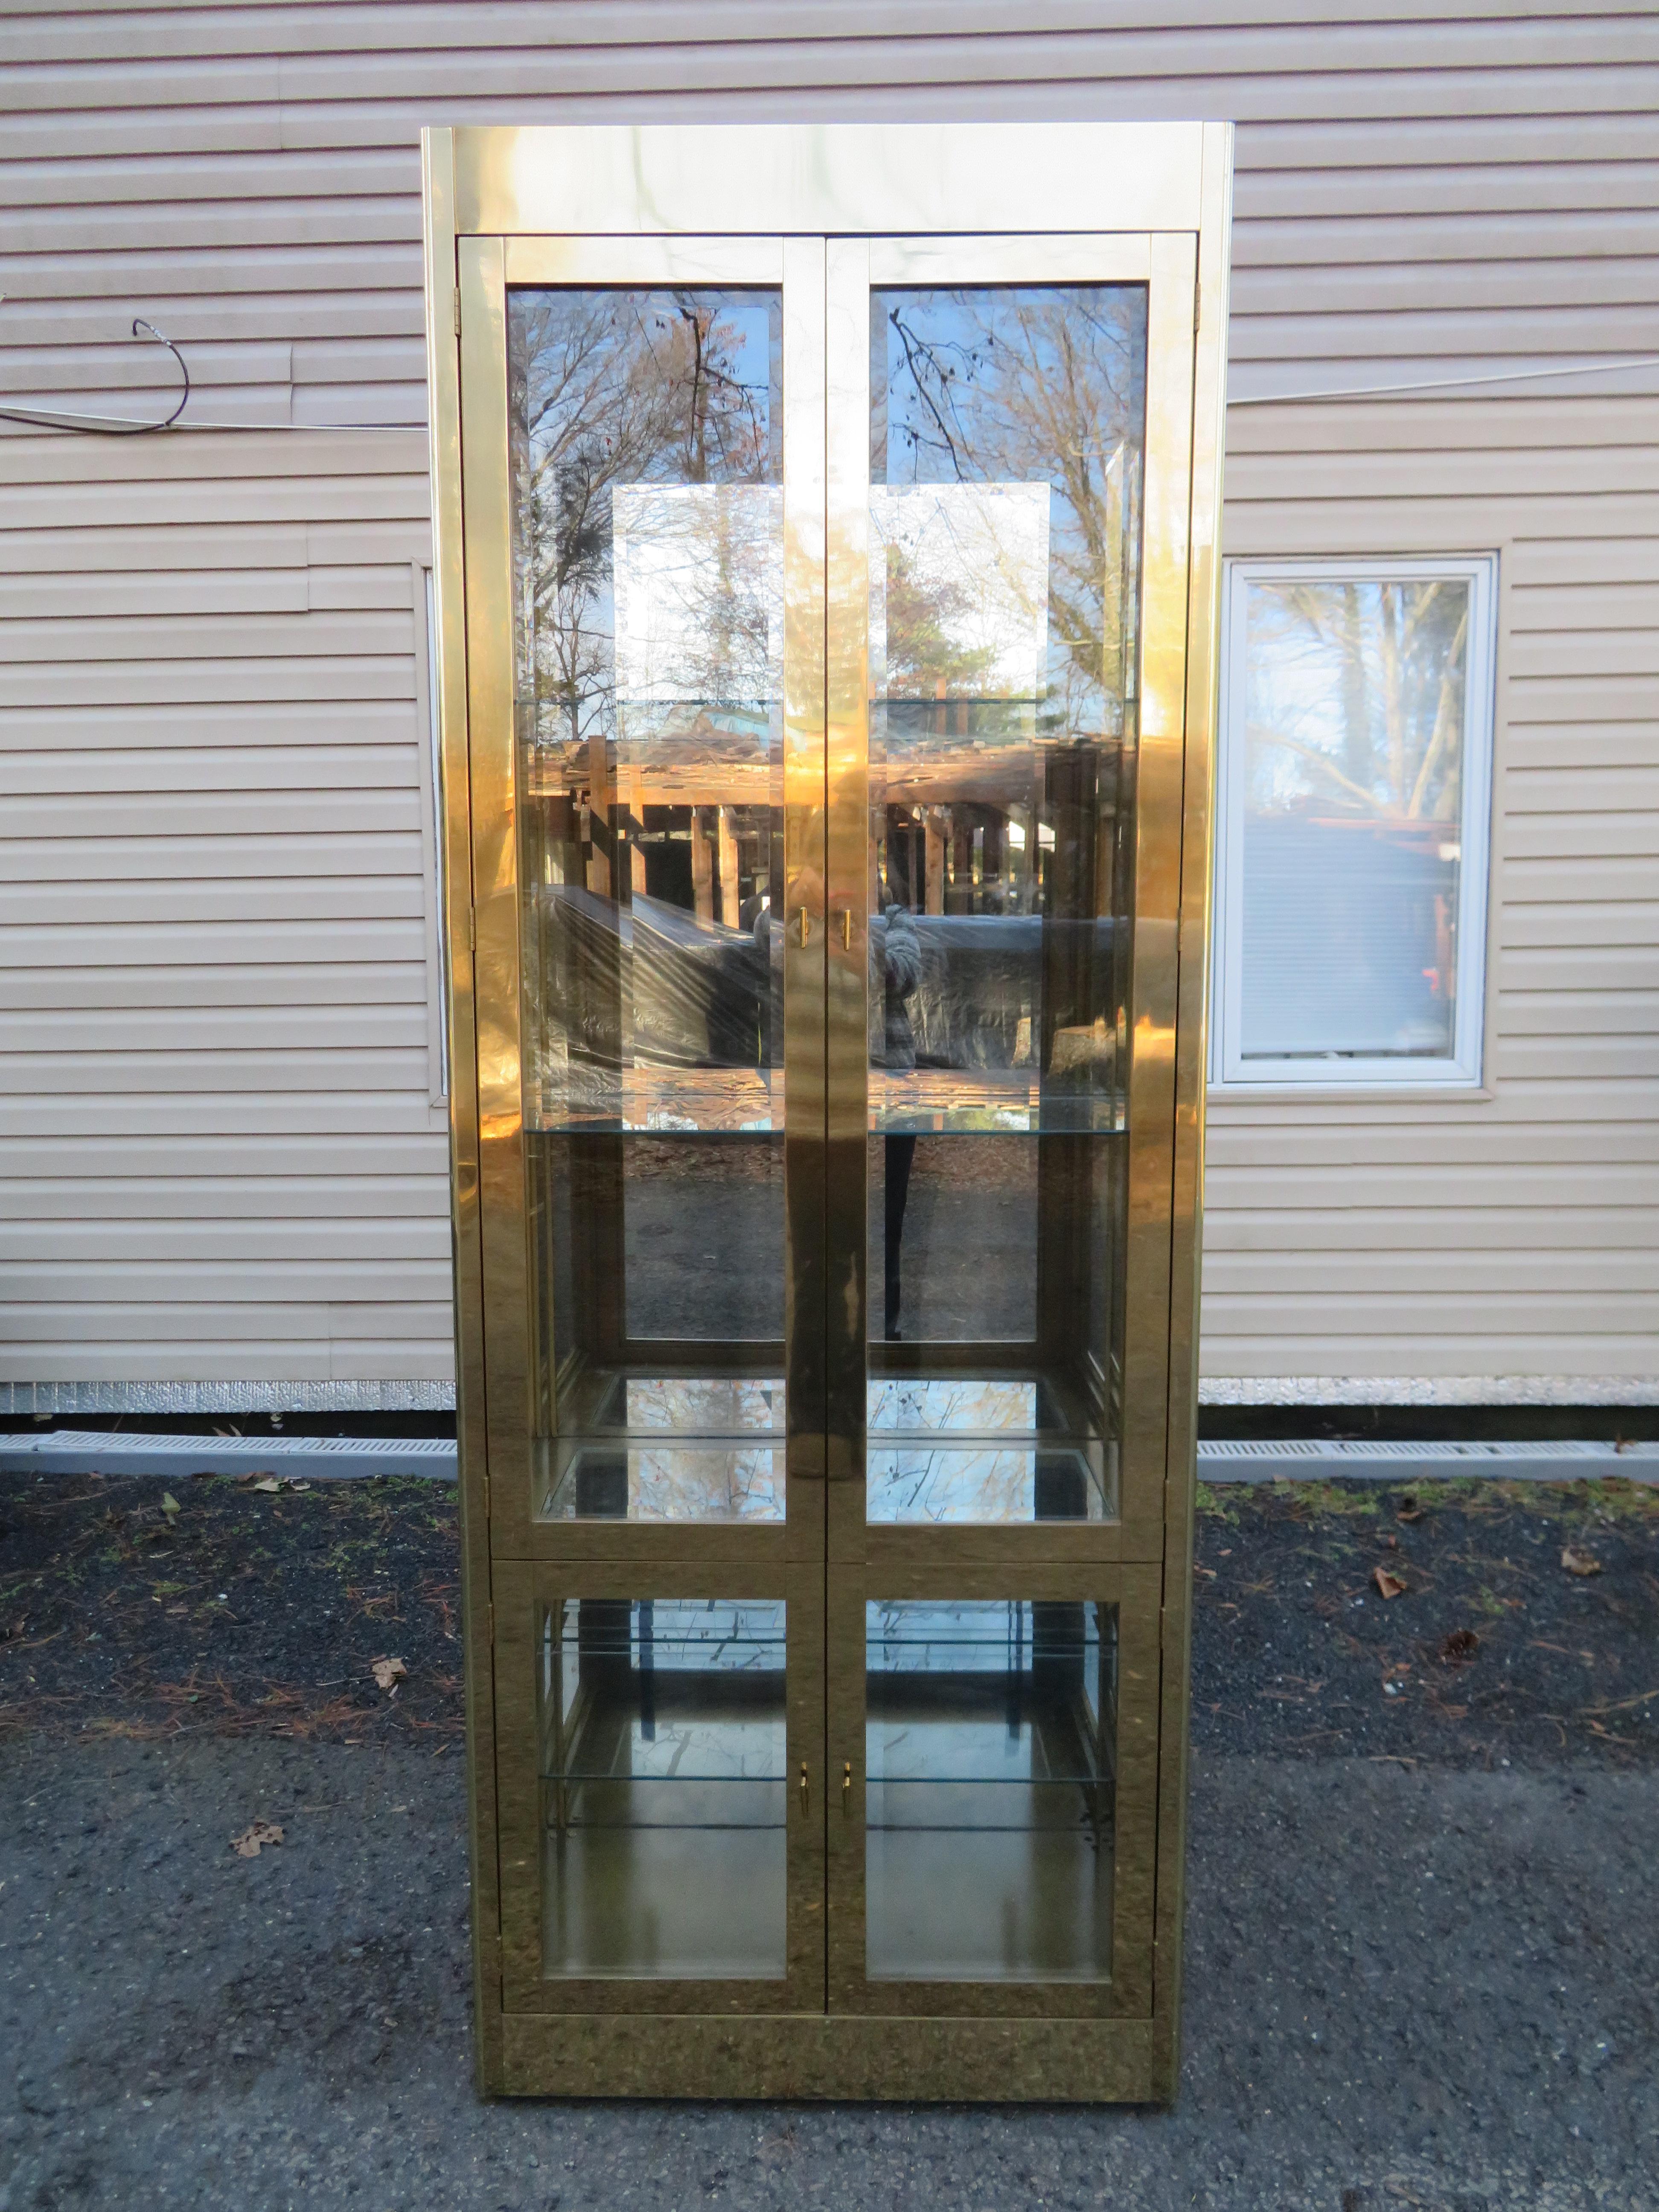 Fantastic Mastercraft brass vitrine. This magnificent vitrine has four heavy doors that open to reveal thick glass shelves with a plate ridge for displaying plates and such. This vitrine is large and impressive- make a huge statement. It measures